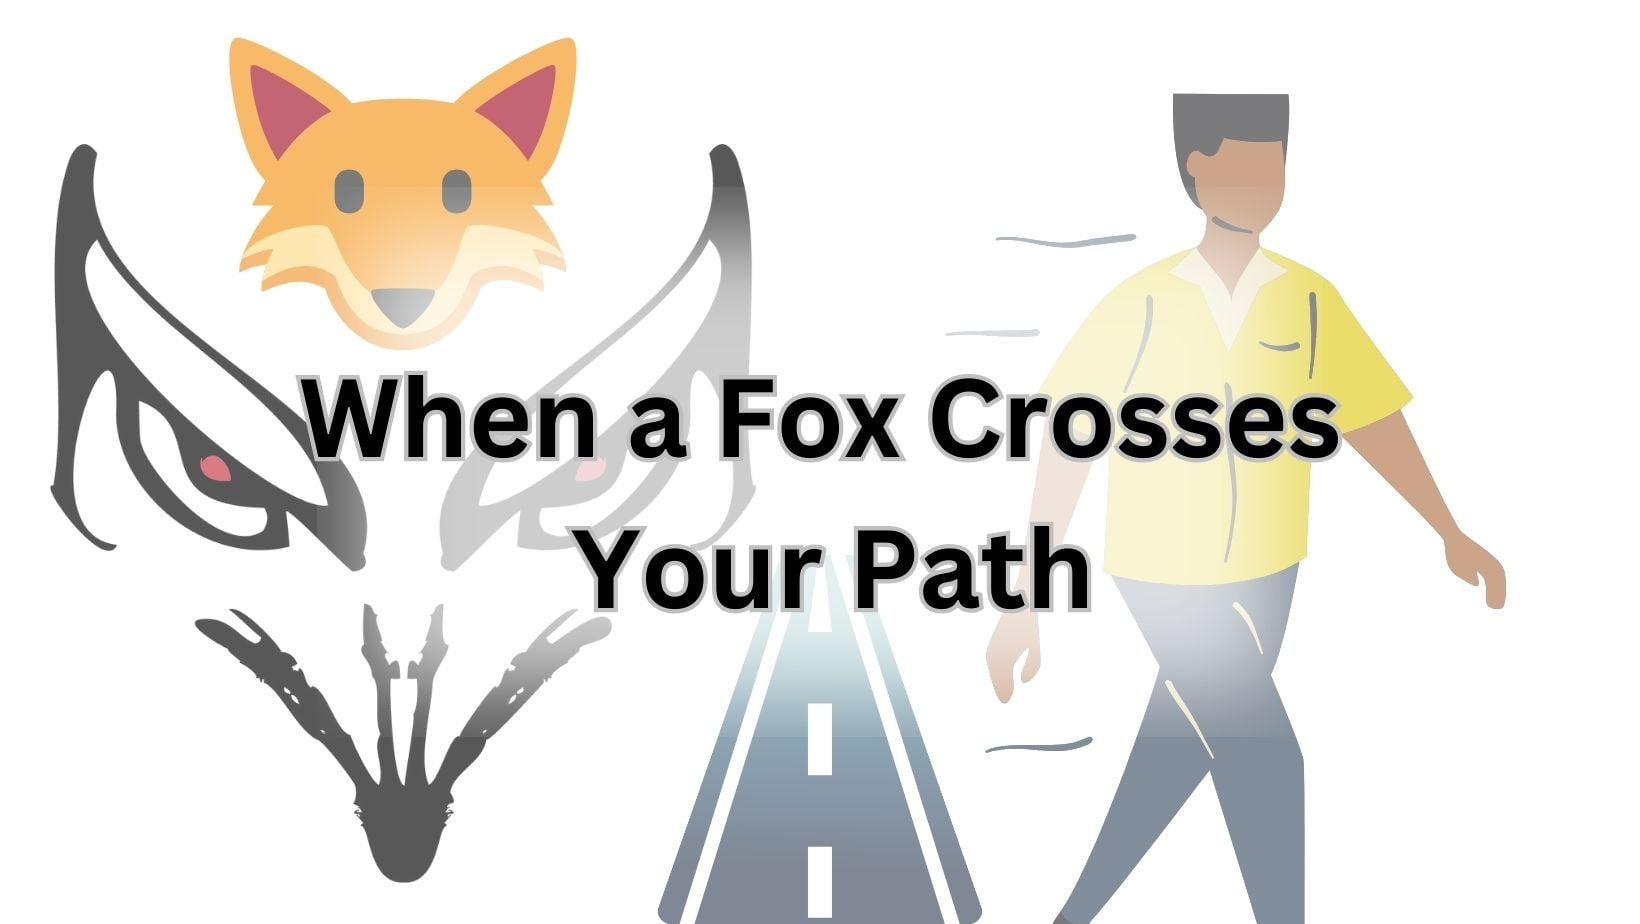 When a Fox Crosses Your Path